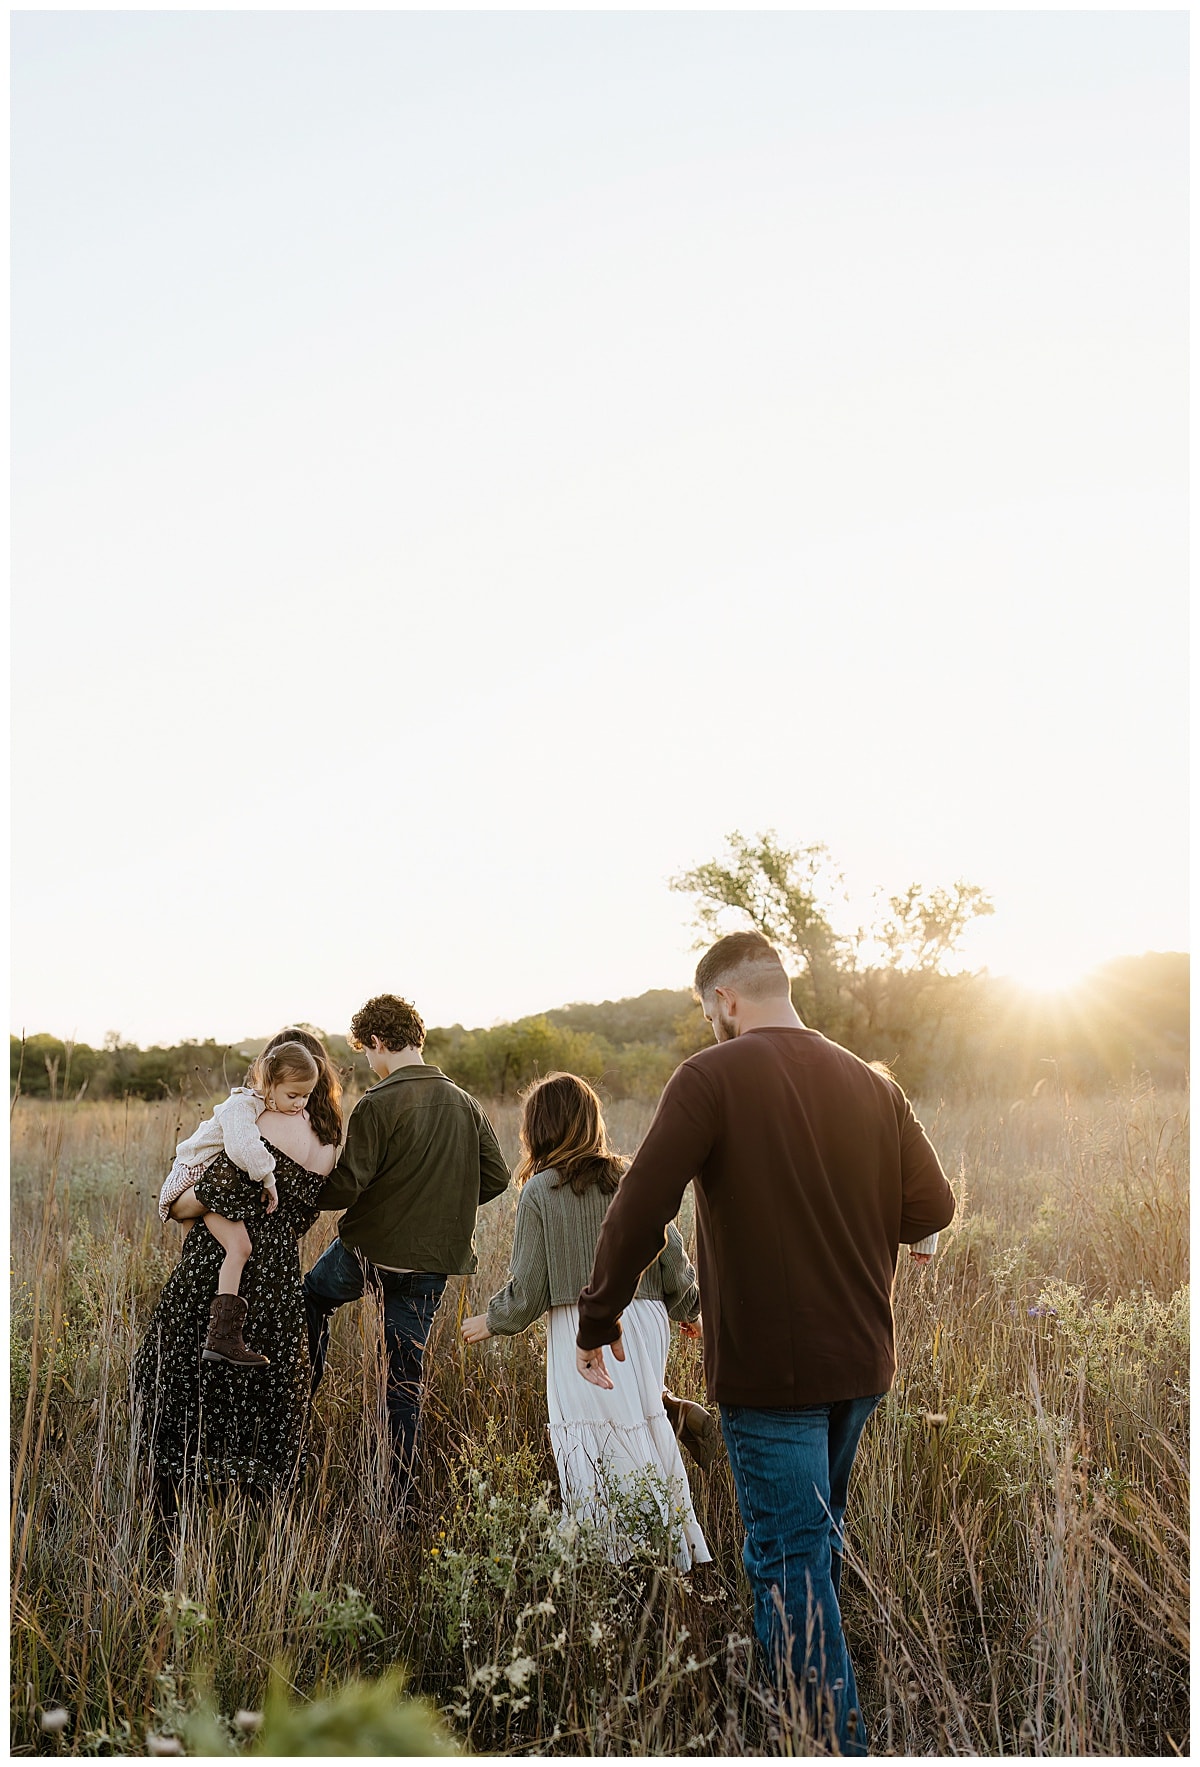 Family walks together for Austin Lifestyle Photographer